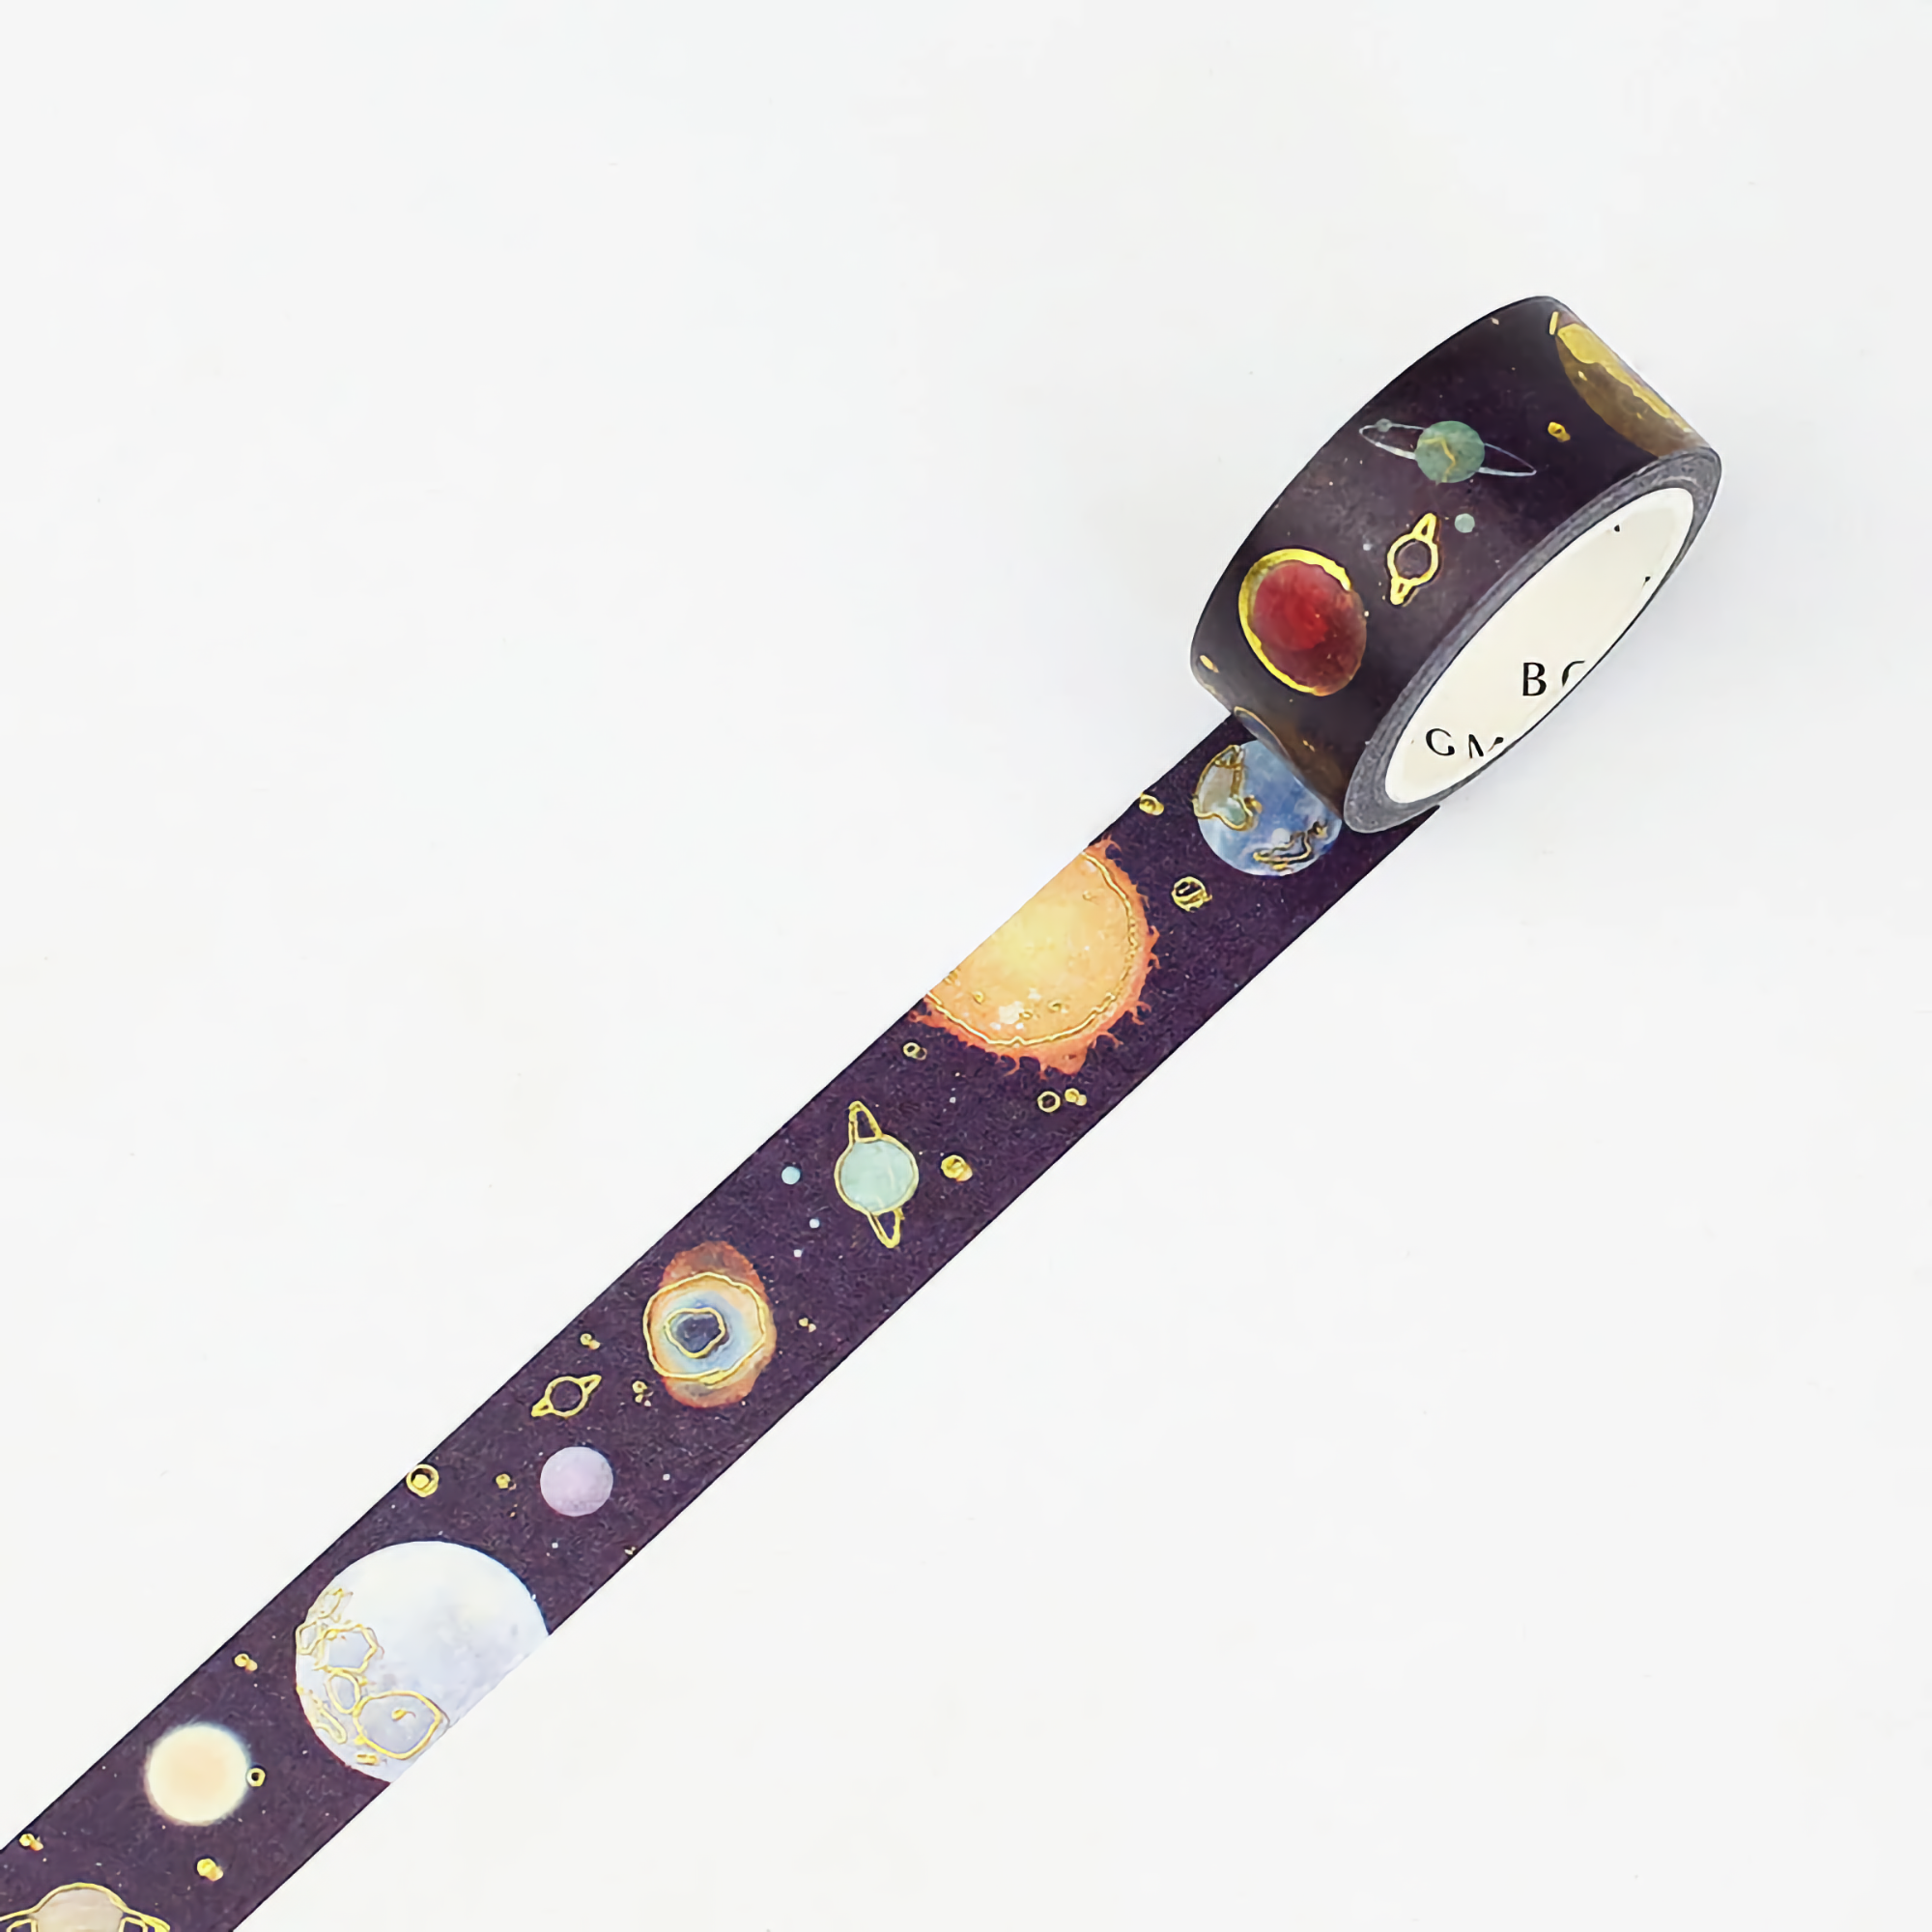 BGM Washi Tape Special Foil Planets 15 mm